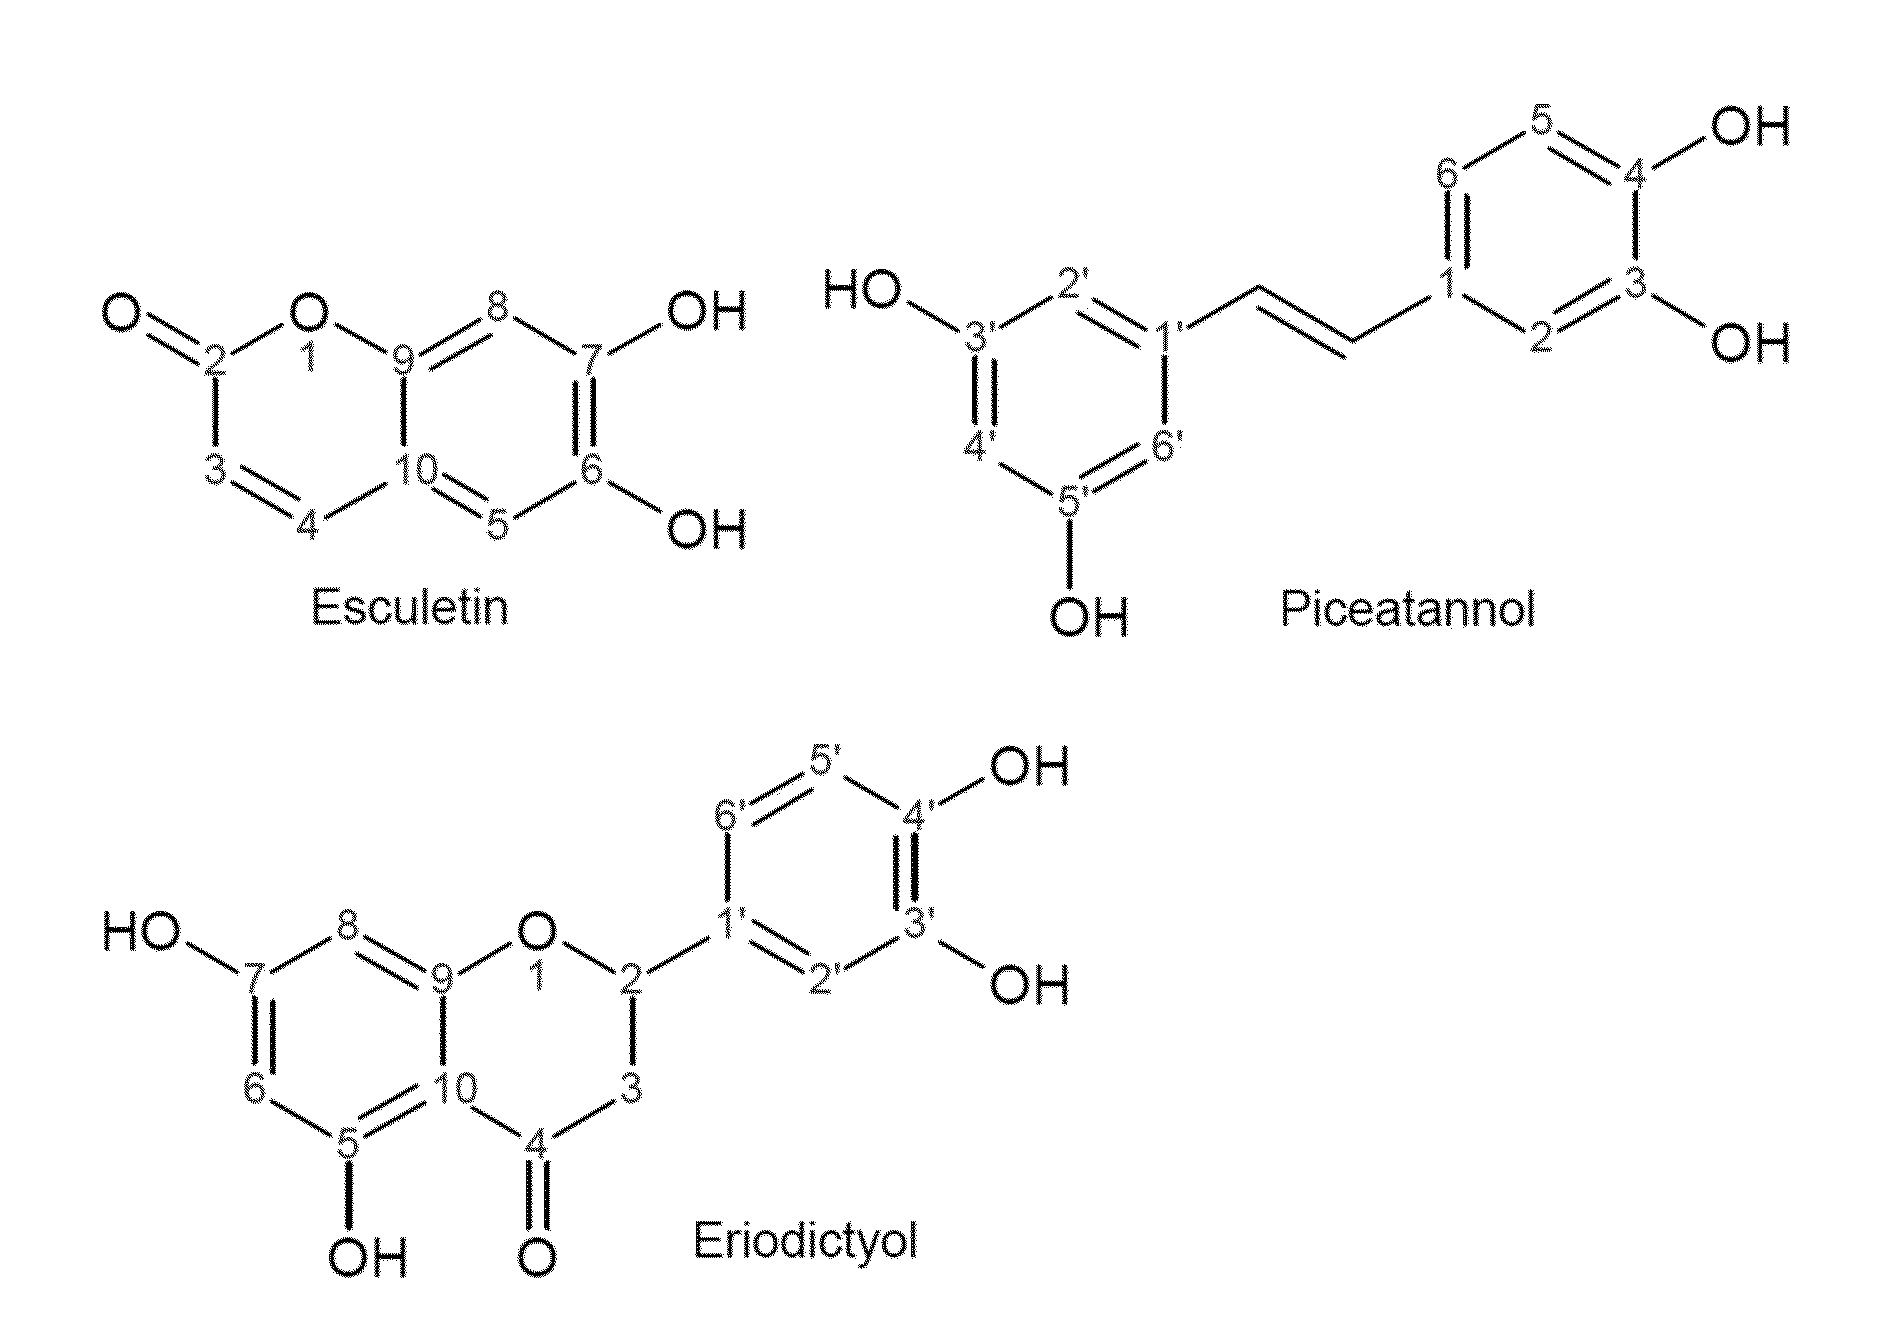 Methods for hydroxylating phenylpropanoids